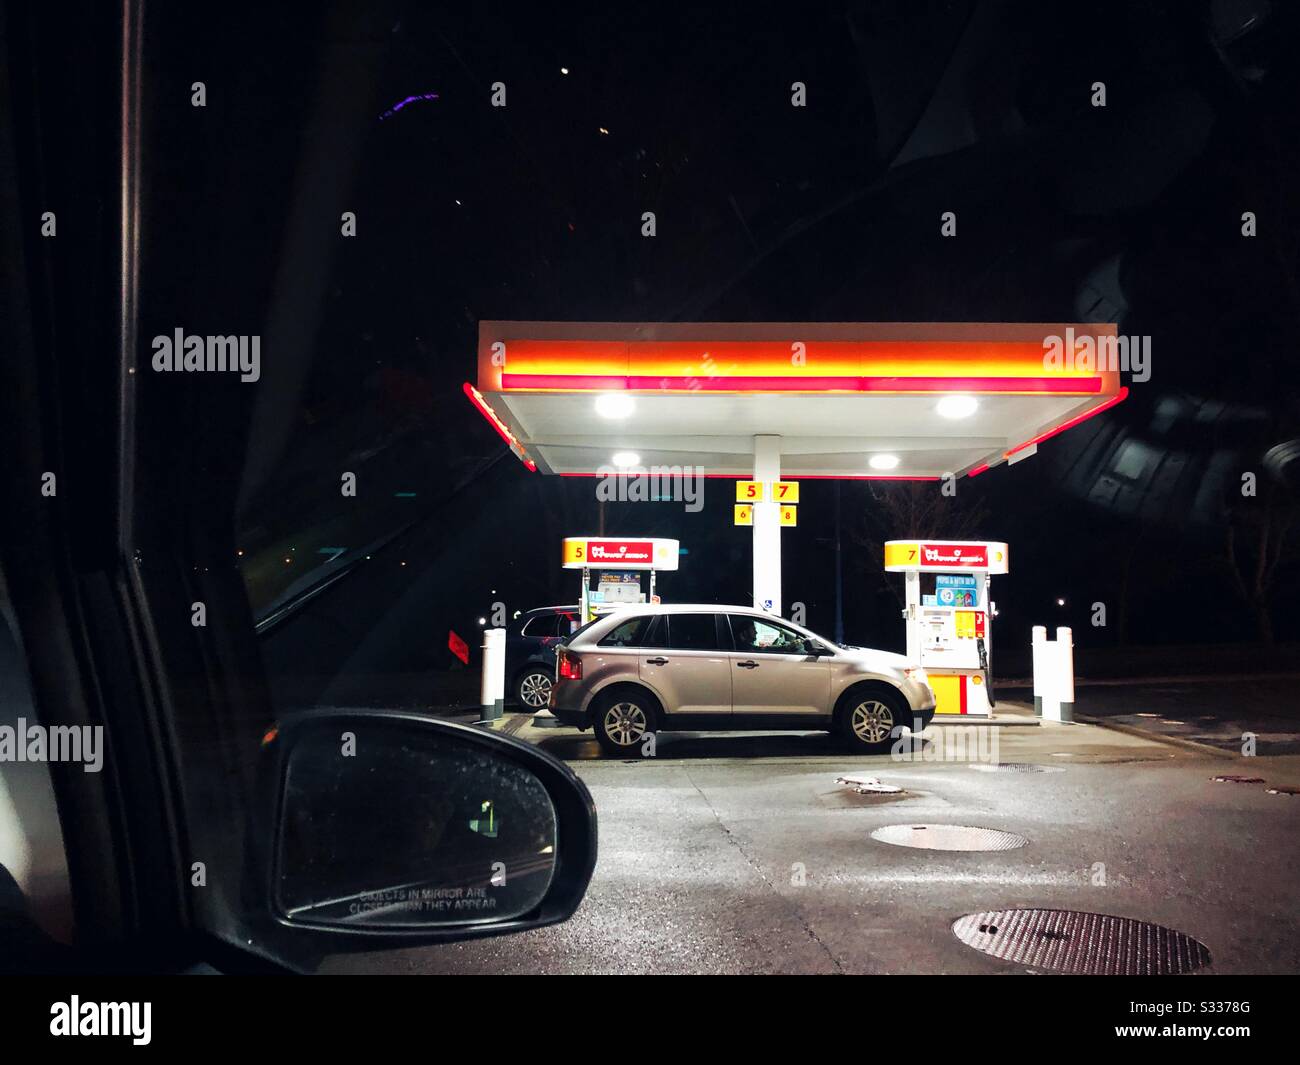 American gas station at night Stock Photo - Alamy